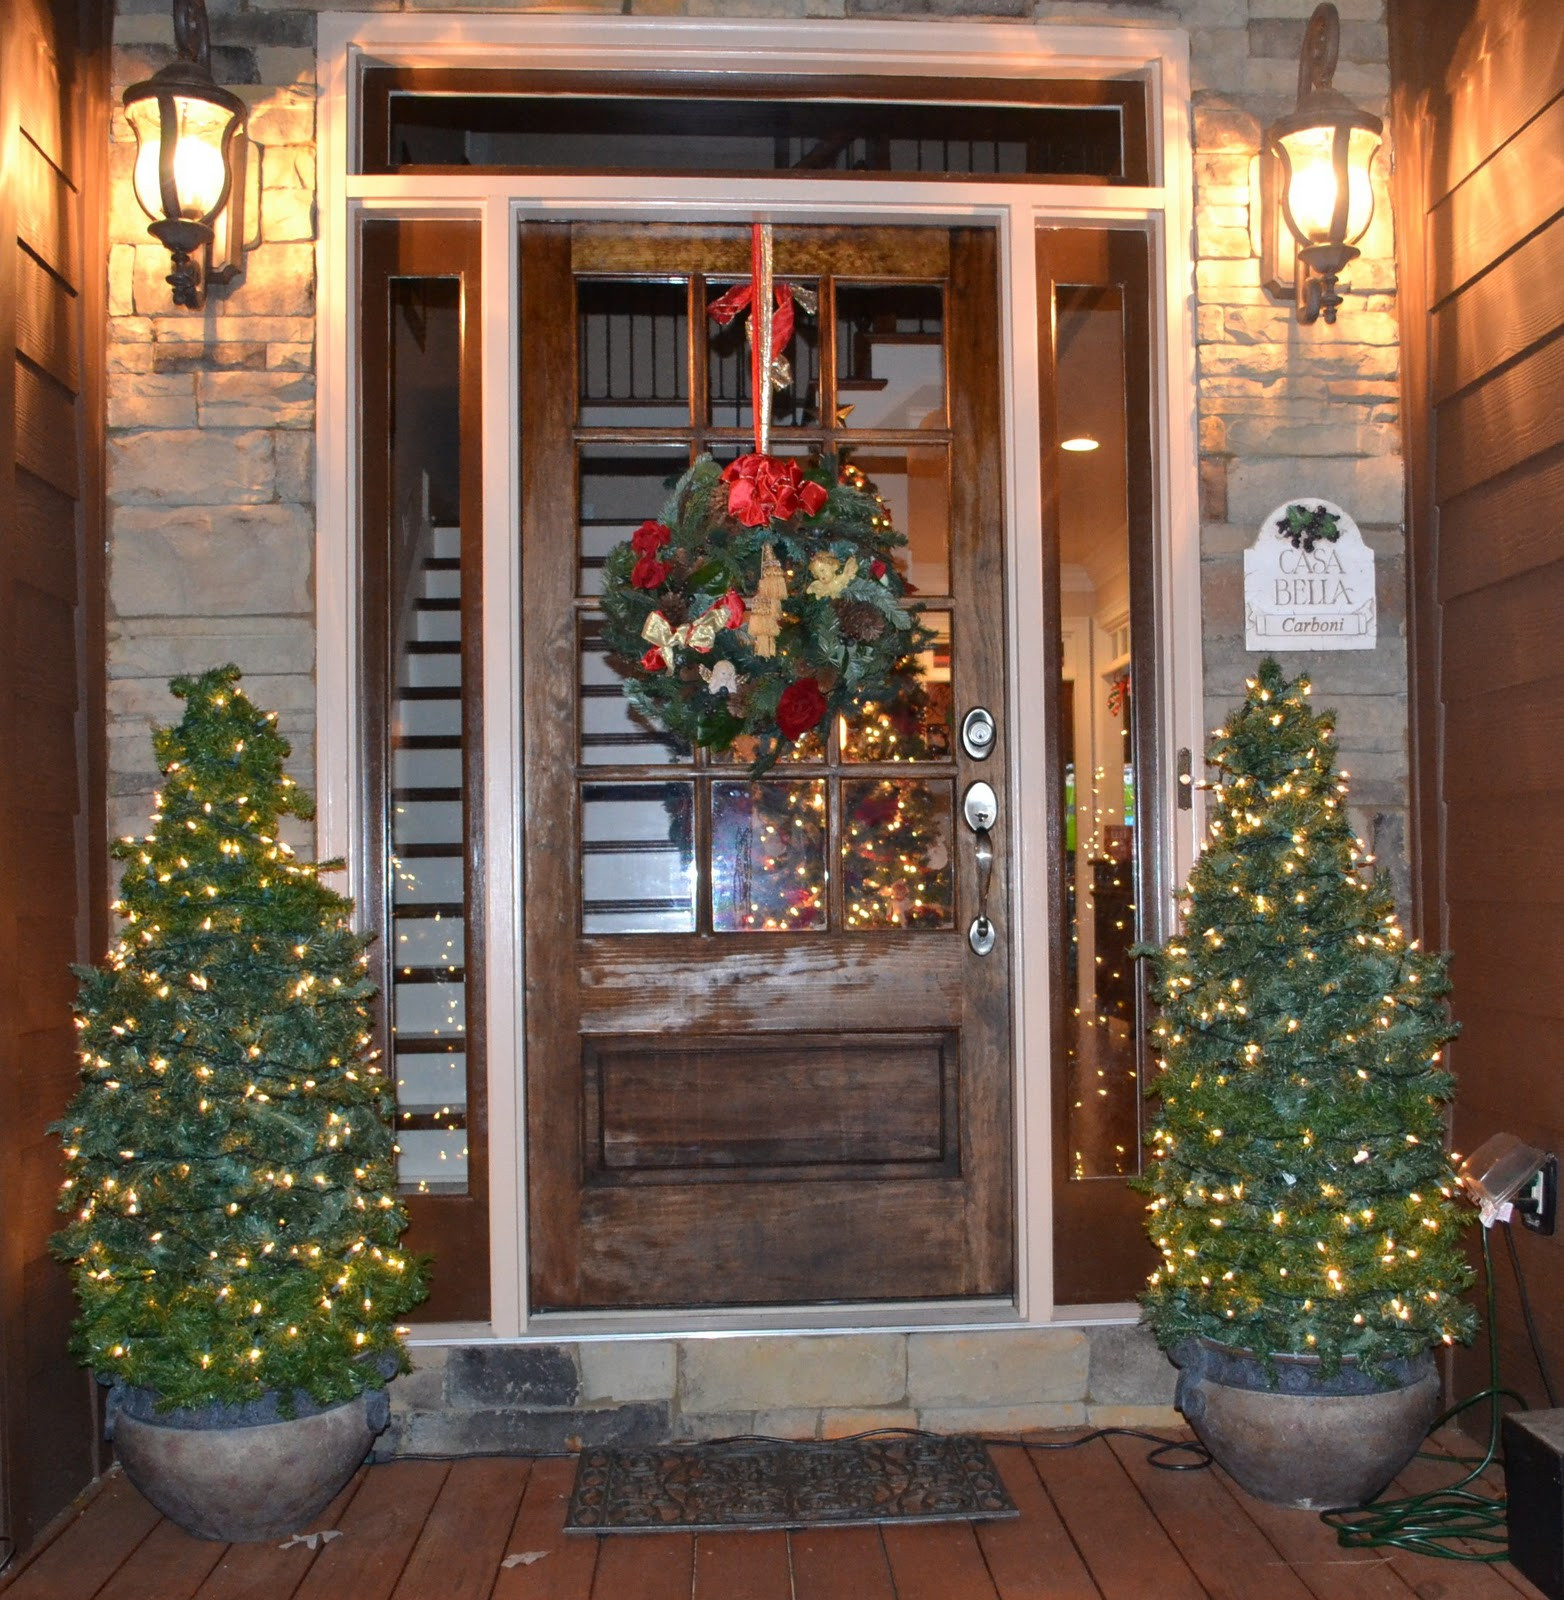 Pre Lit Porch Christmas Trees
 Southern Accents Christmas Trees for the Porch